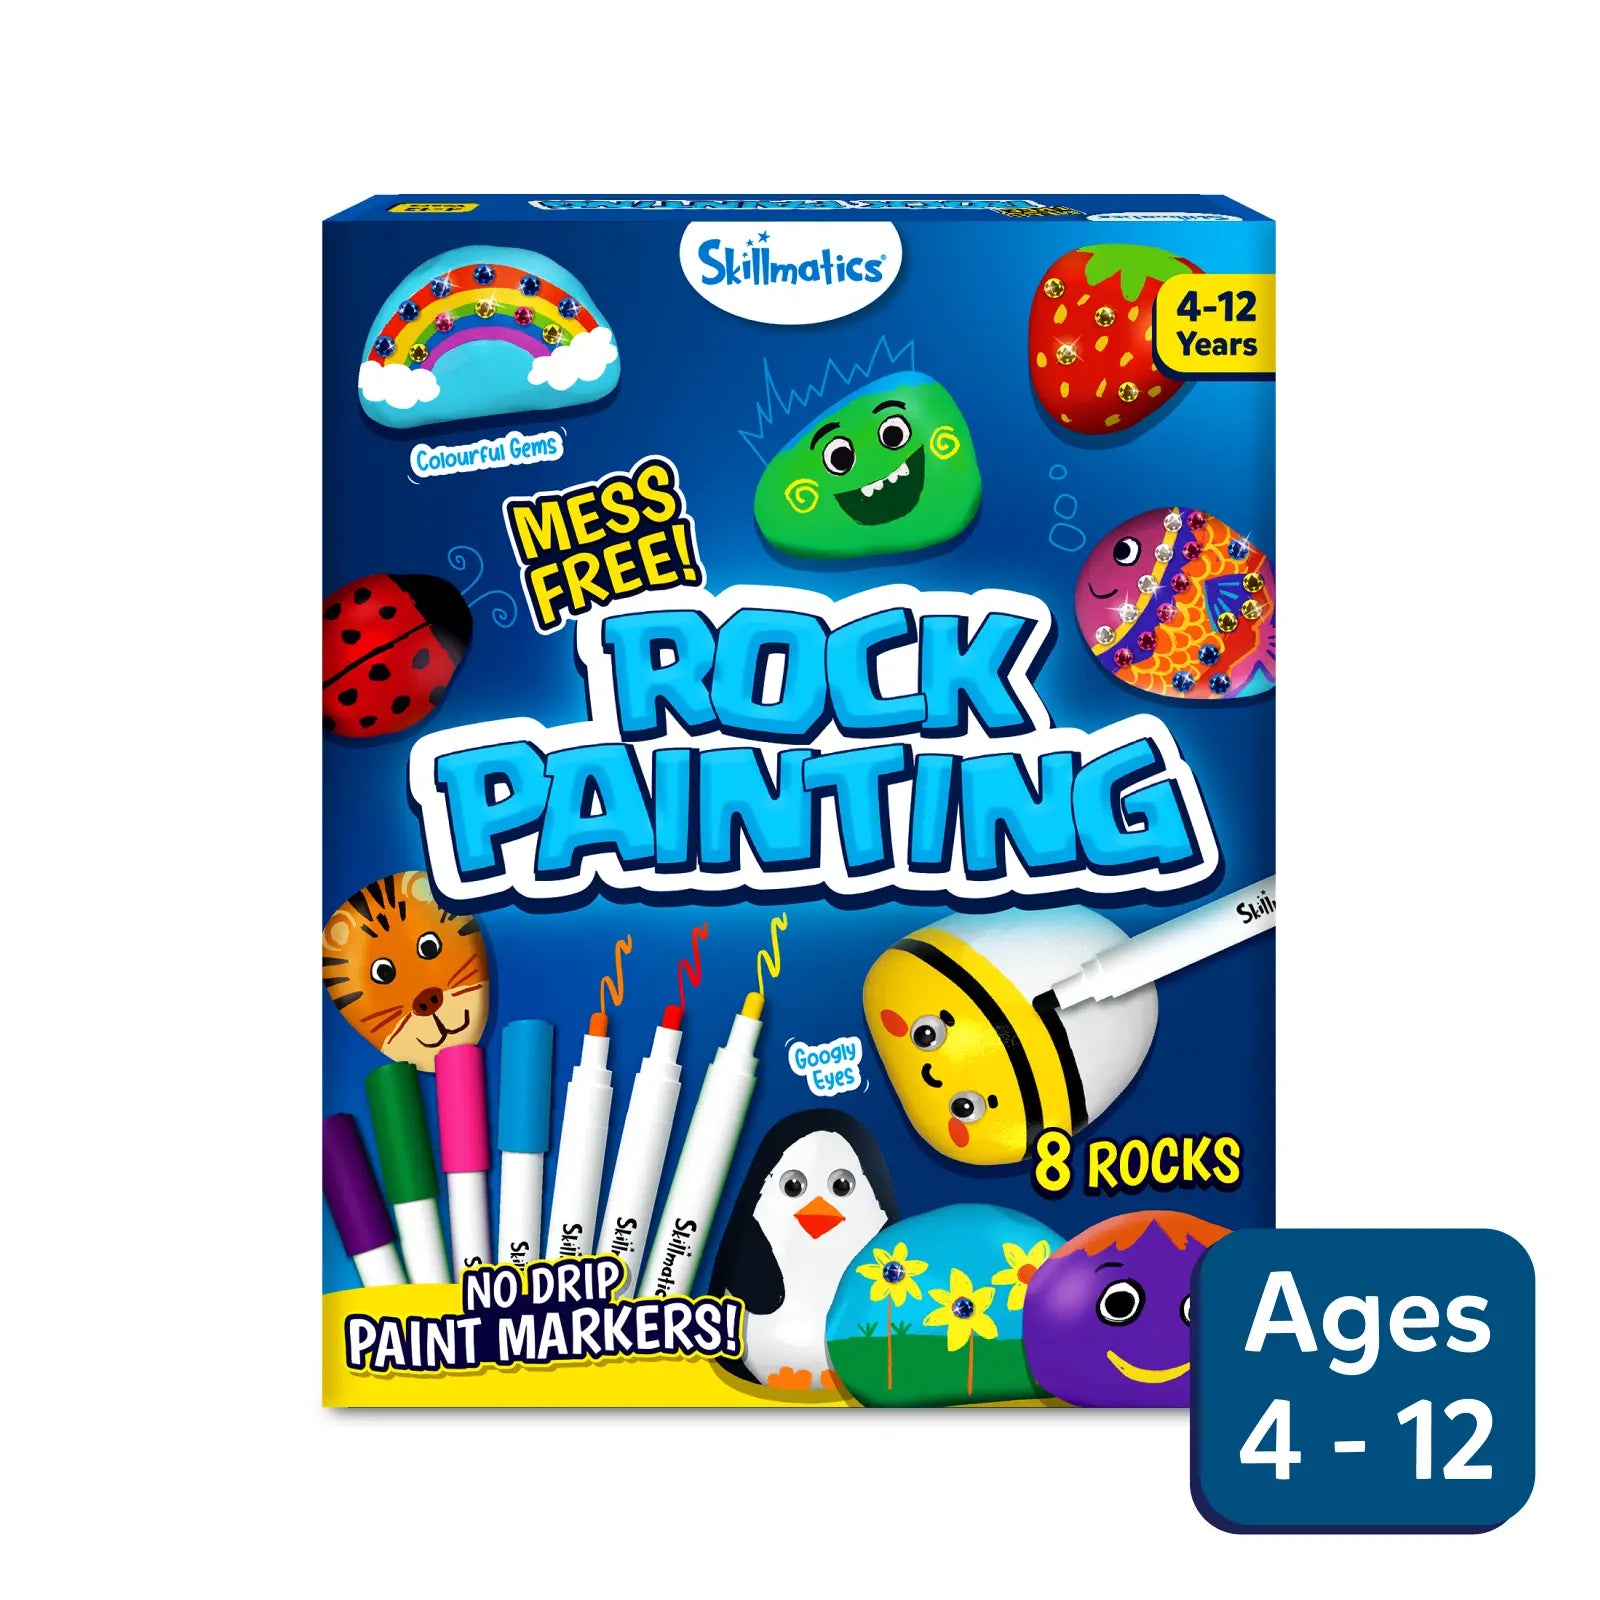 Rock Painting Kit | Mess-Free Art & Craft Activity (ages 4-12)